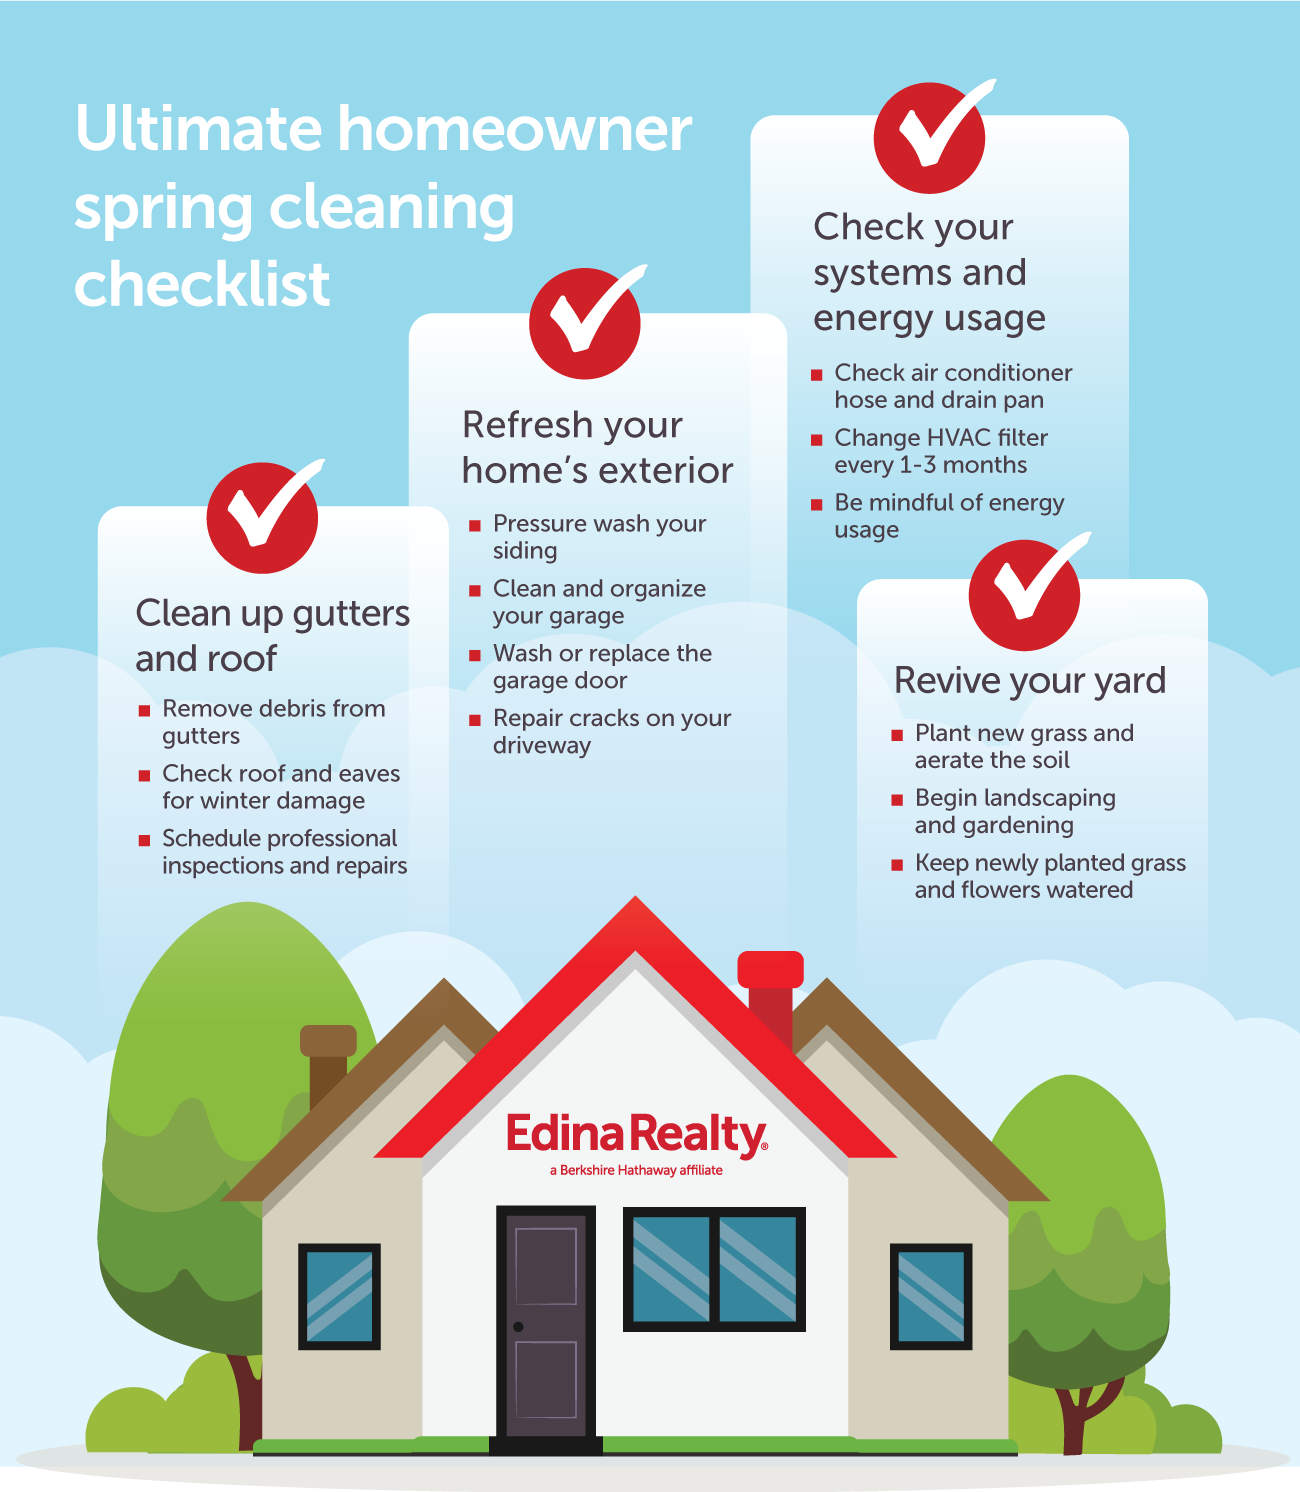 The Ultimate homeowner spring cleaning checklist